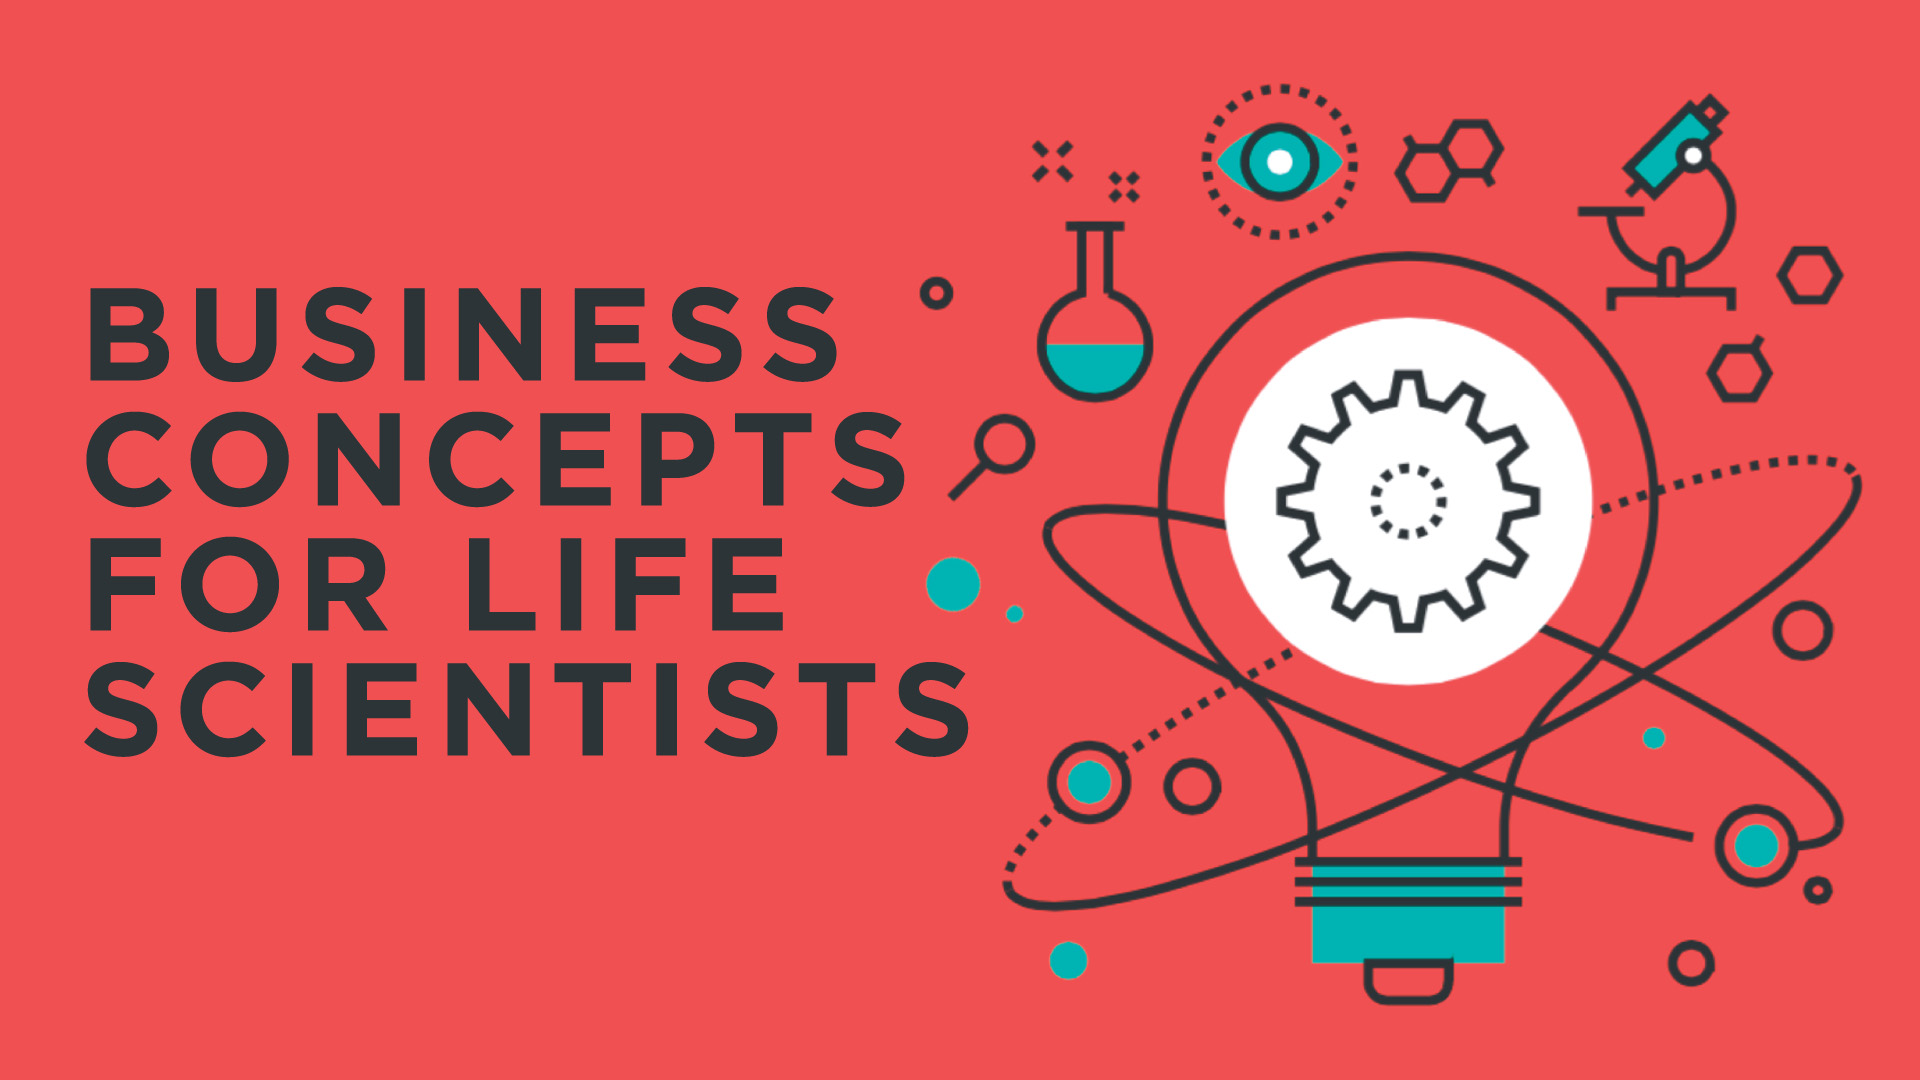 Business Concepts for Life Scientists